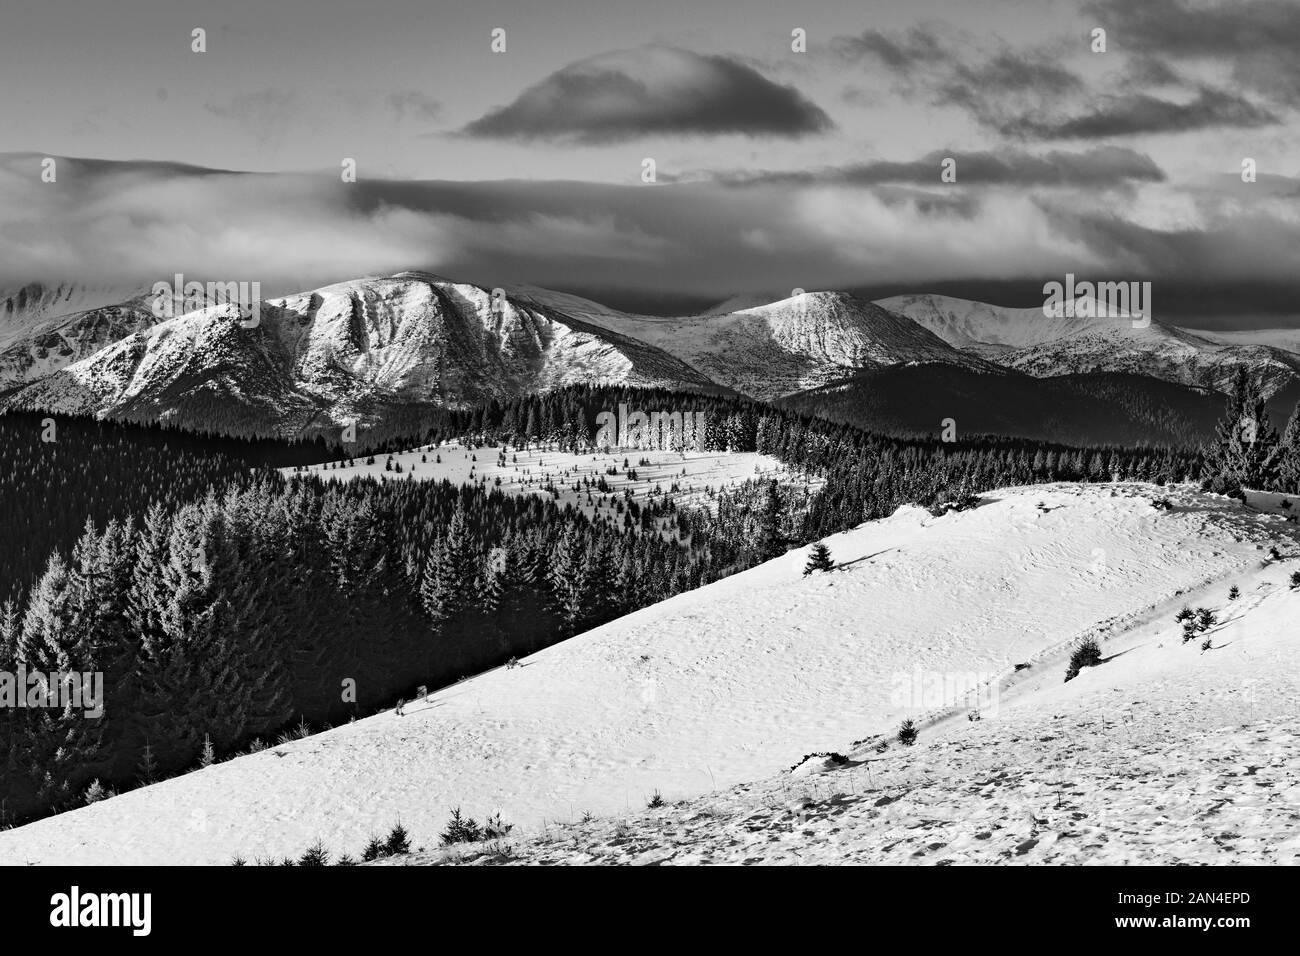 Artistic winter mountain landscape in black and white. Carpathian mountains, Ukraine. High resolution. Stock Photo